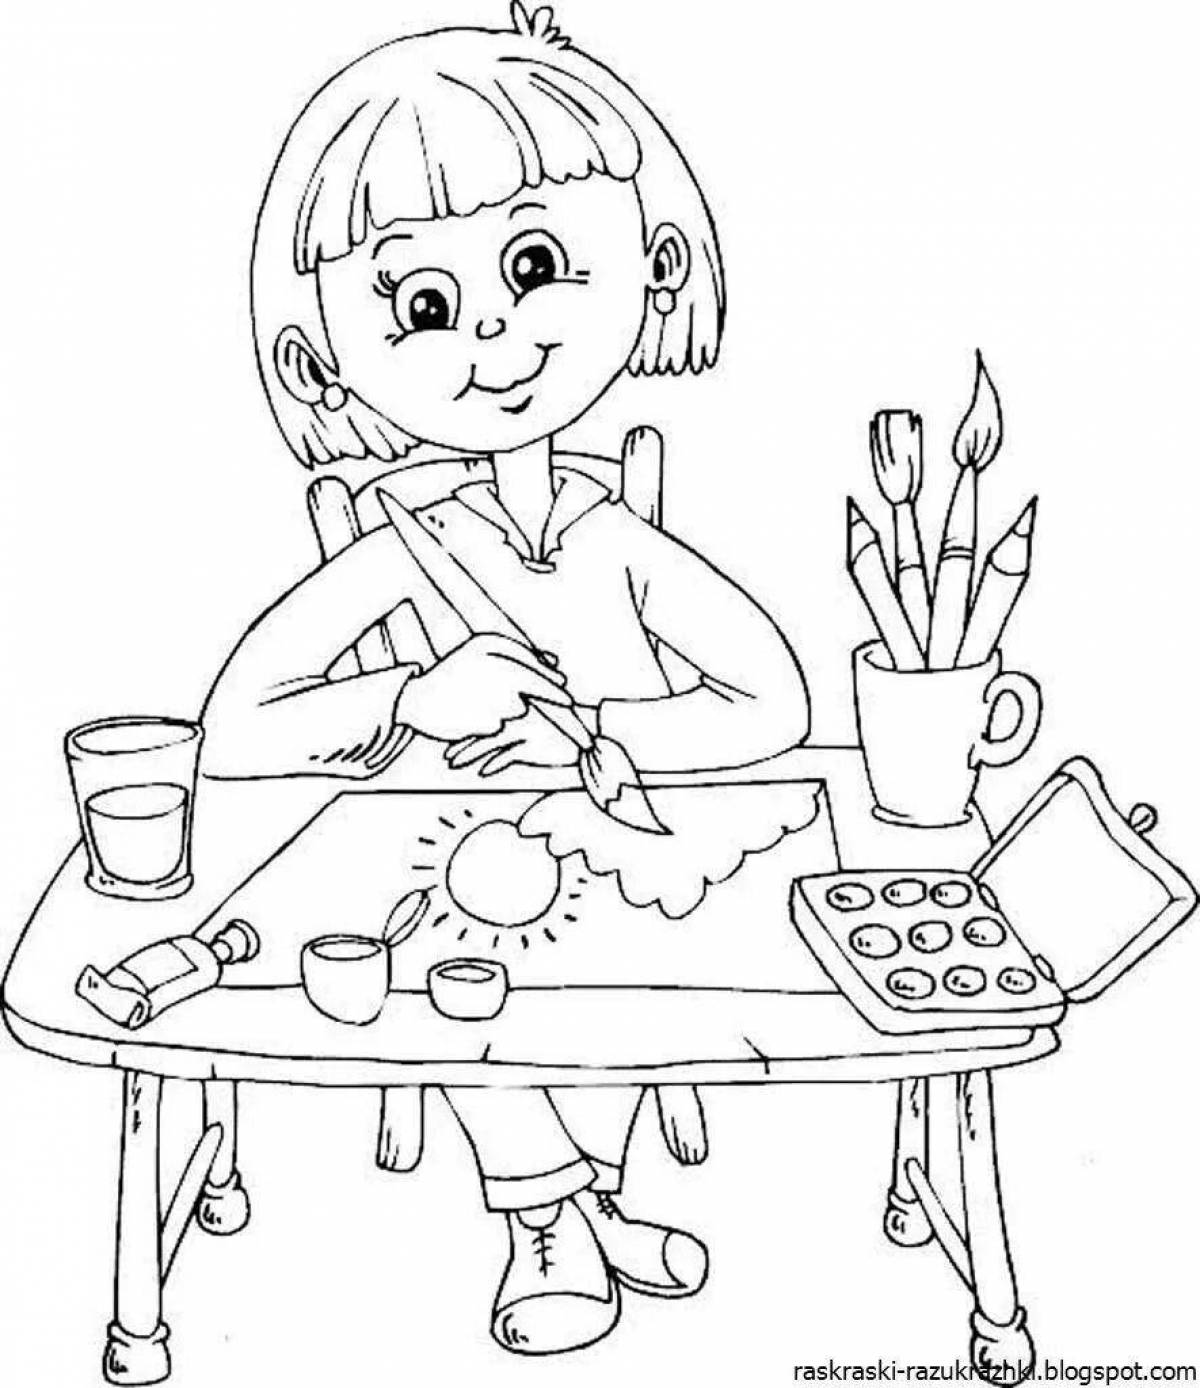 Colorful drawing of a coloring page